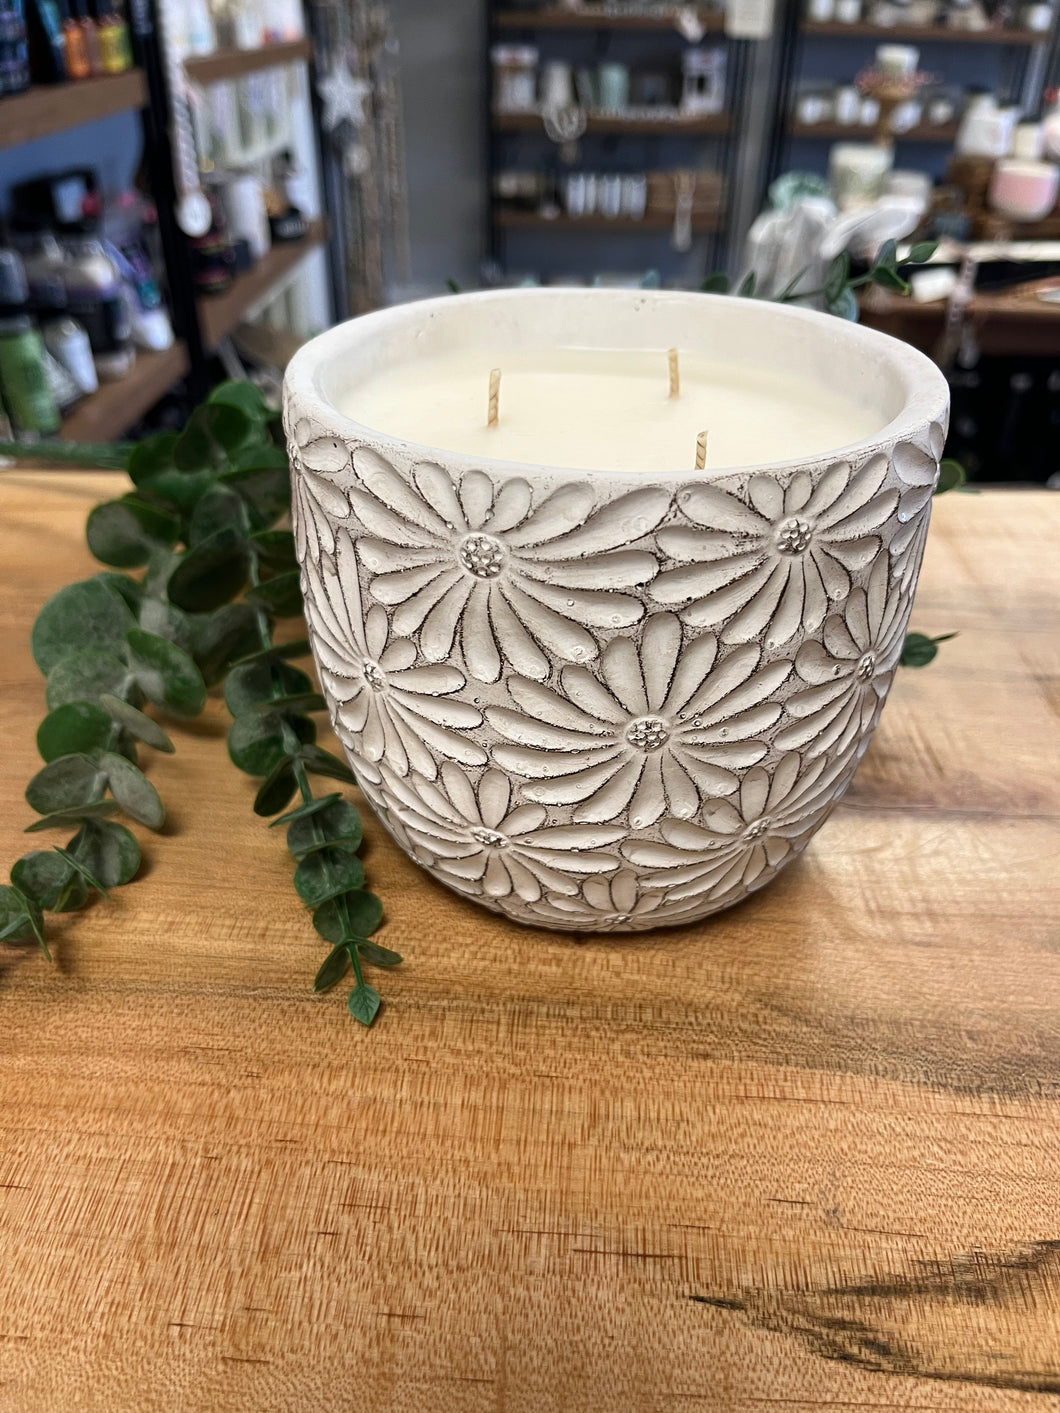 Daisy Candle In Plant Pot